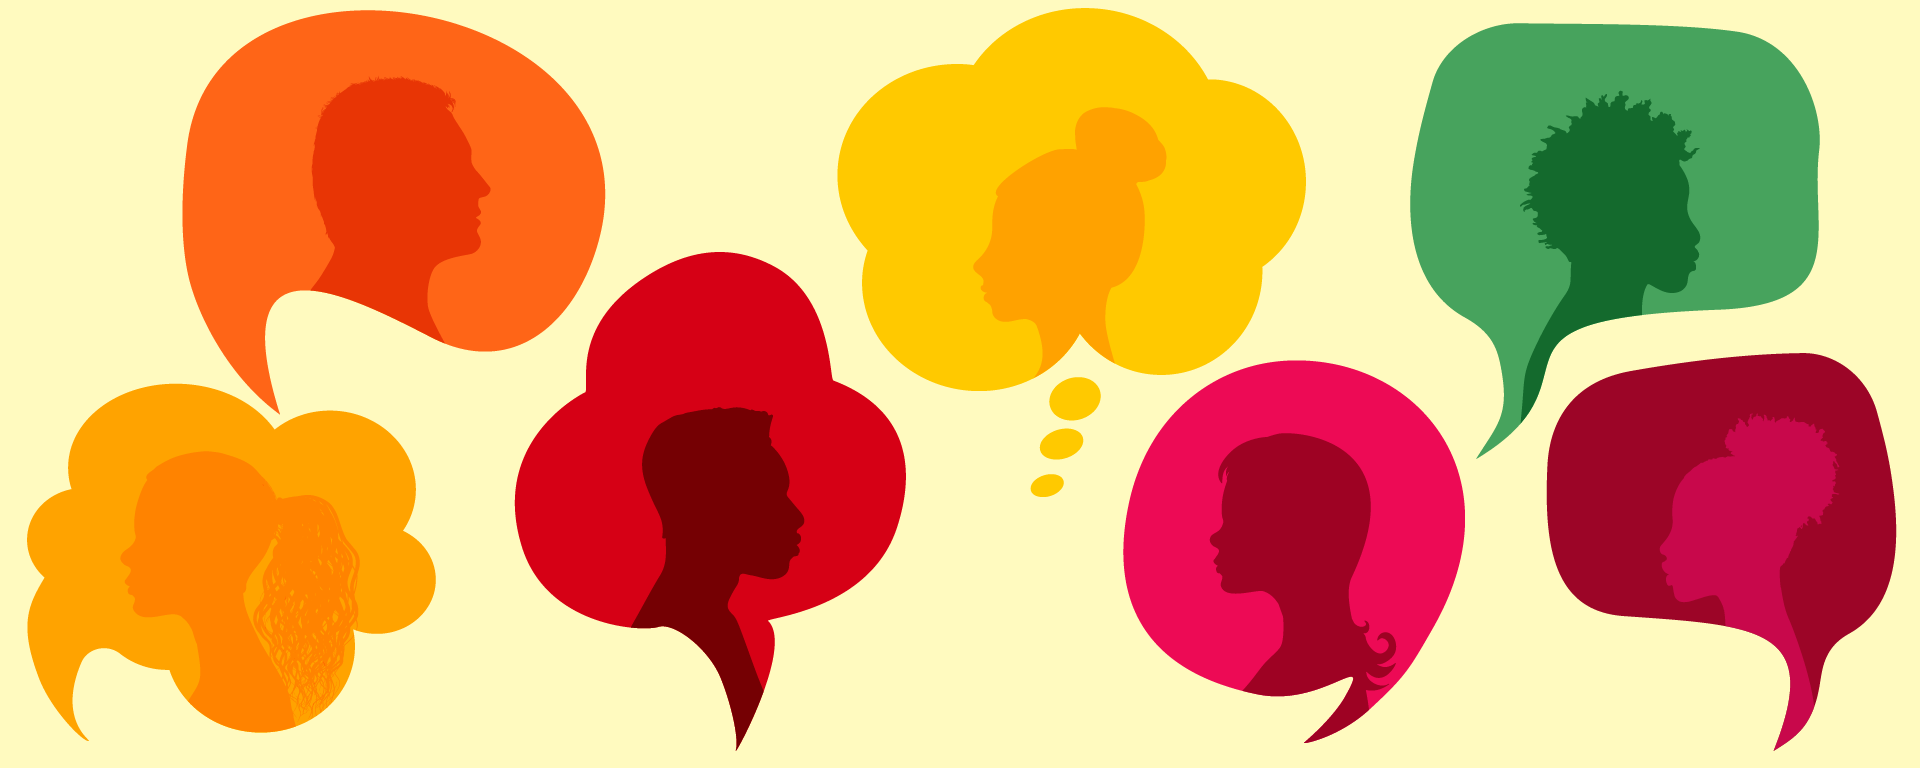 Colourful silhouettes of people in different coloured thought and speech bubbles, on a pale yellow background.